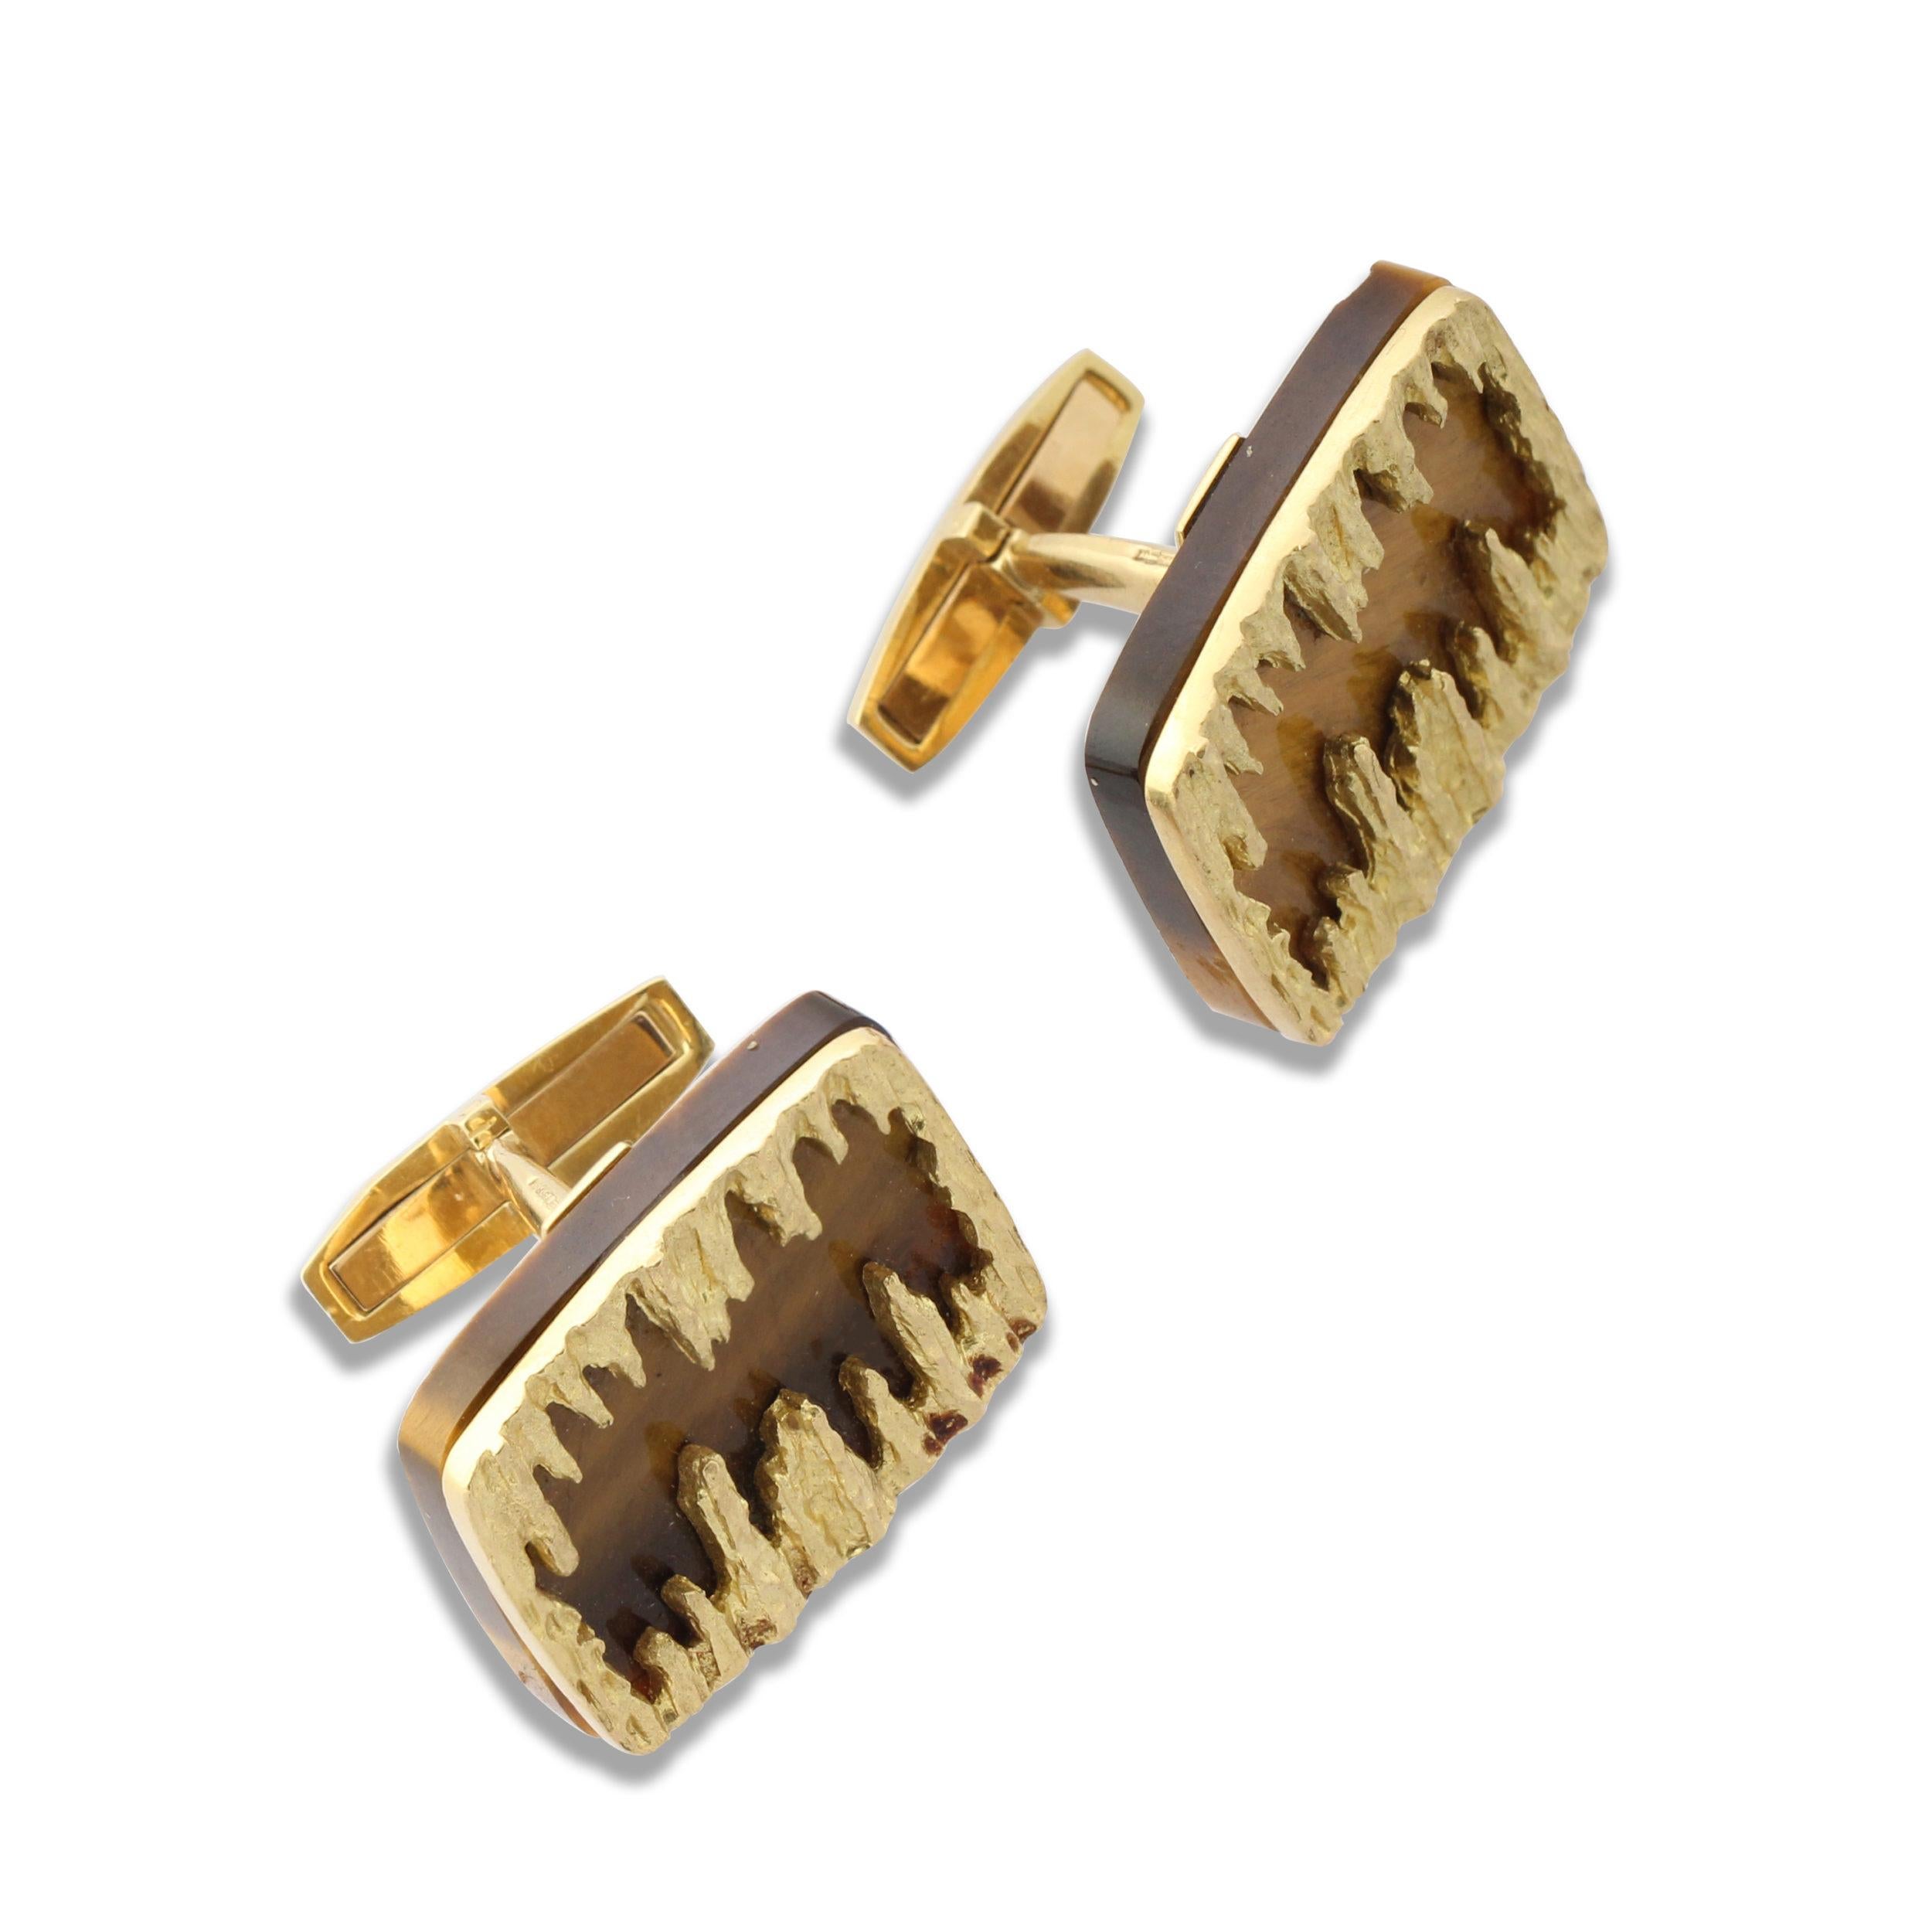 A pair of 18k gold rectangular cufflinks by Grima set with a panel of tiger’s eye quartz beneath an abstract textured gold mount. Circa 1970s.